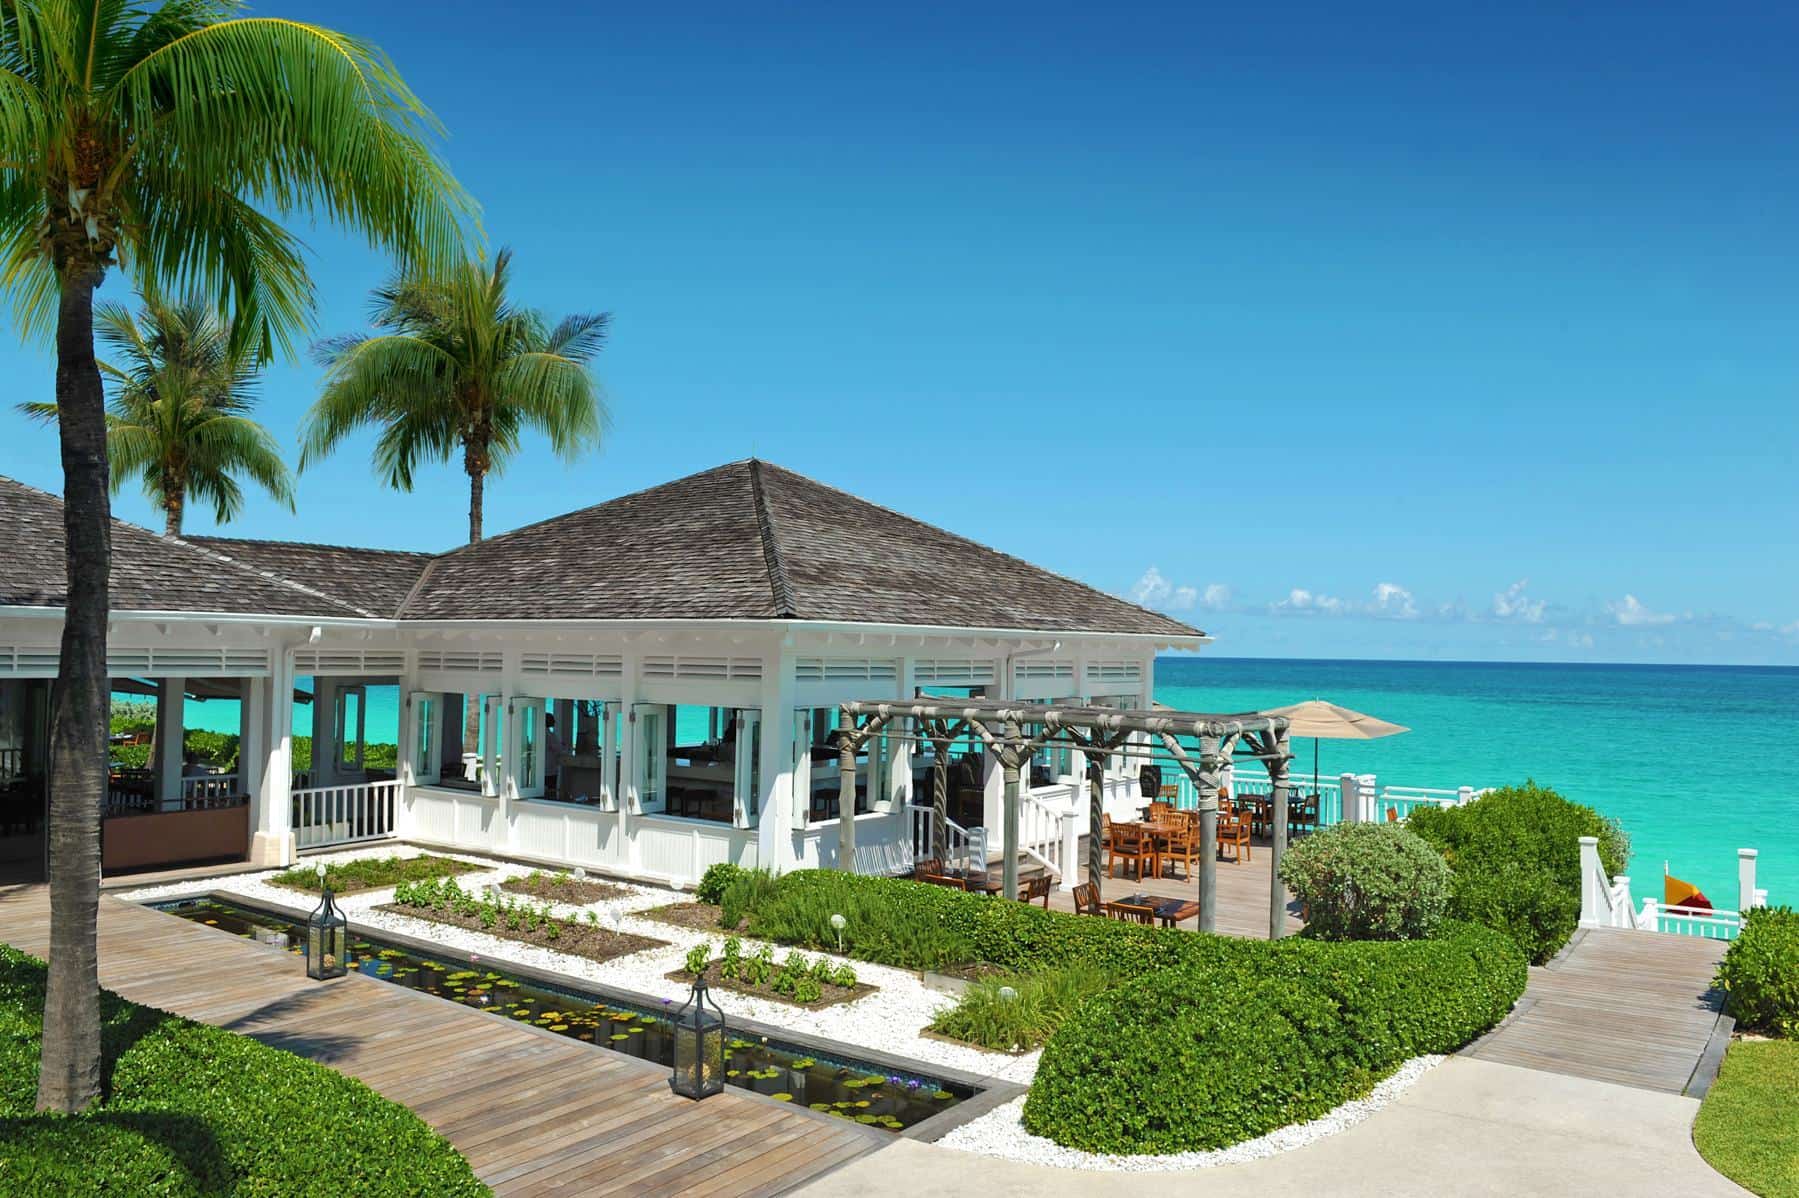 5 Reasons Why the Bahamas are Perfect for a Luxury Holiday